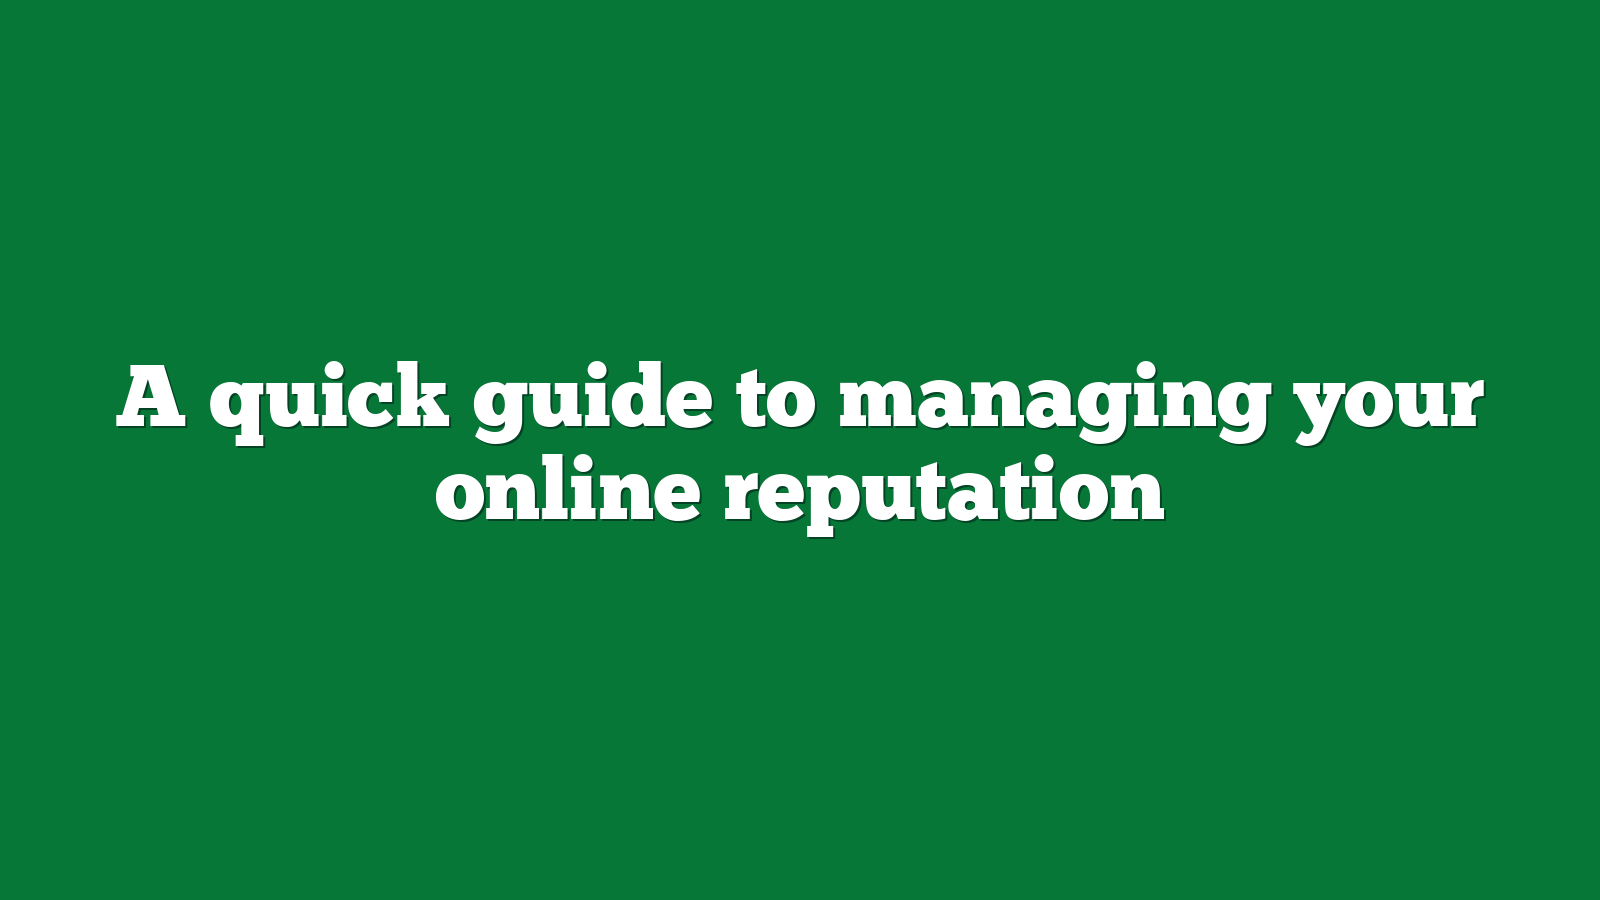 A quick guide to managing your online reputation